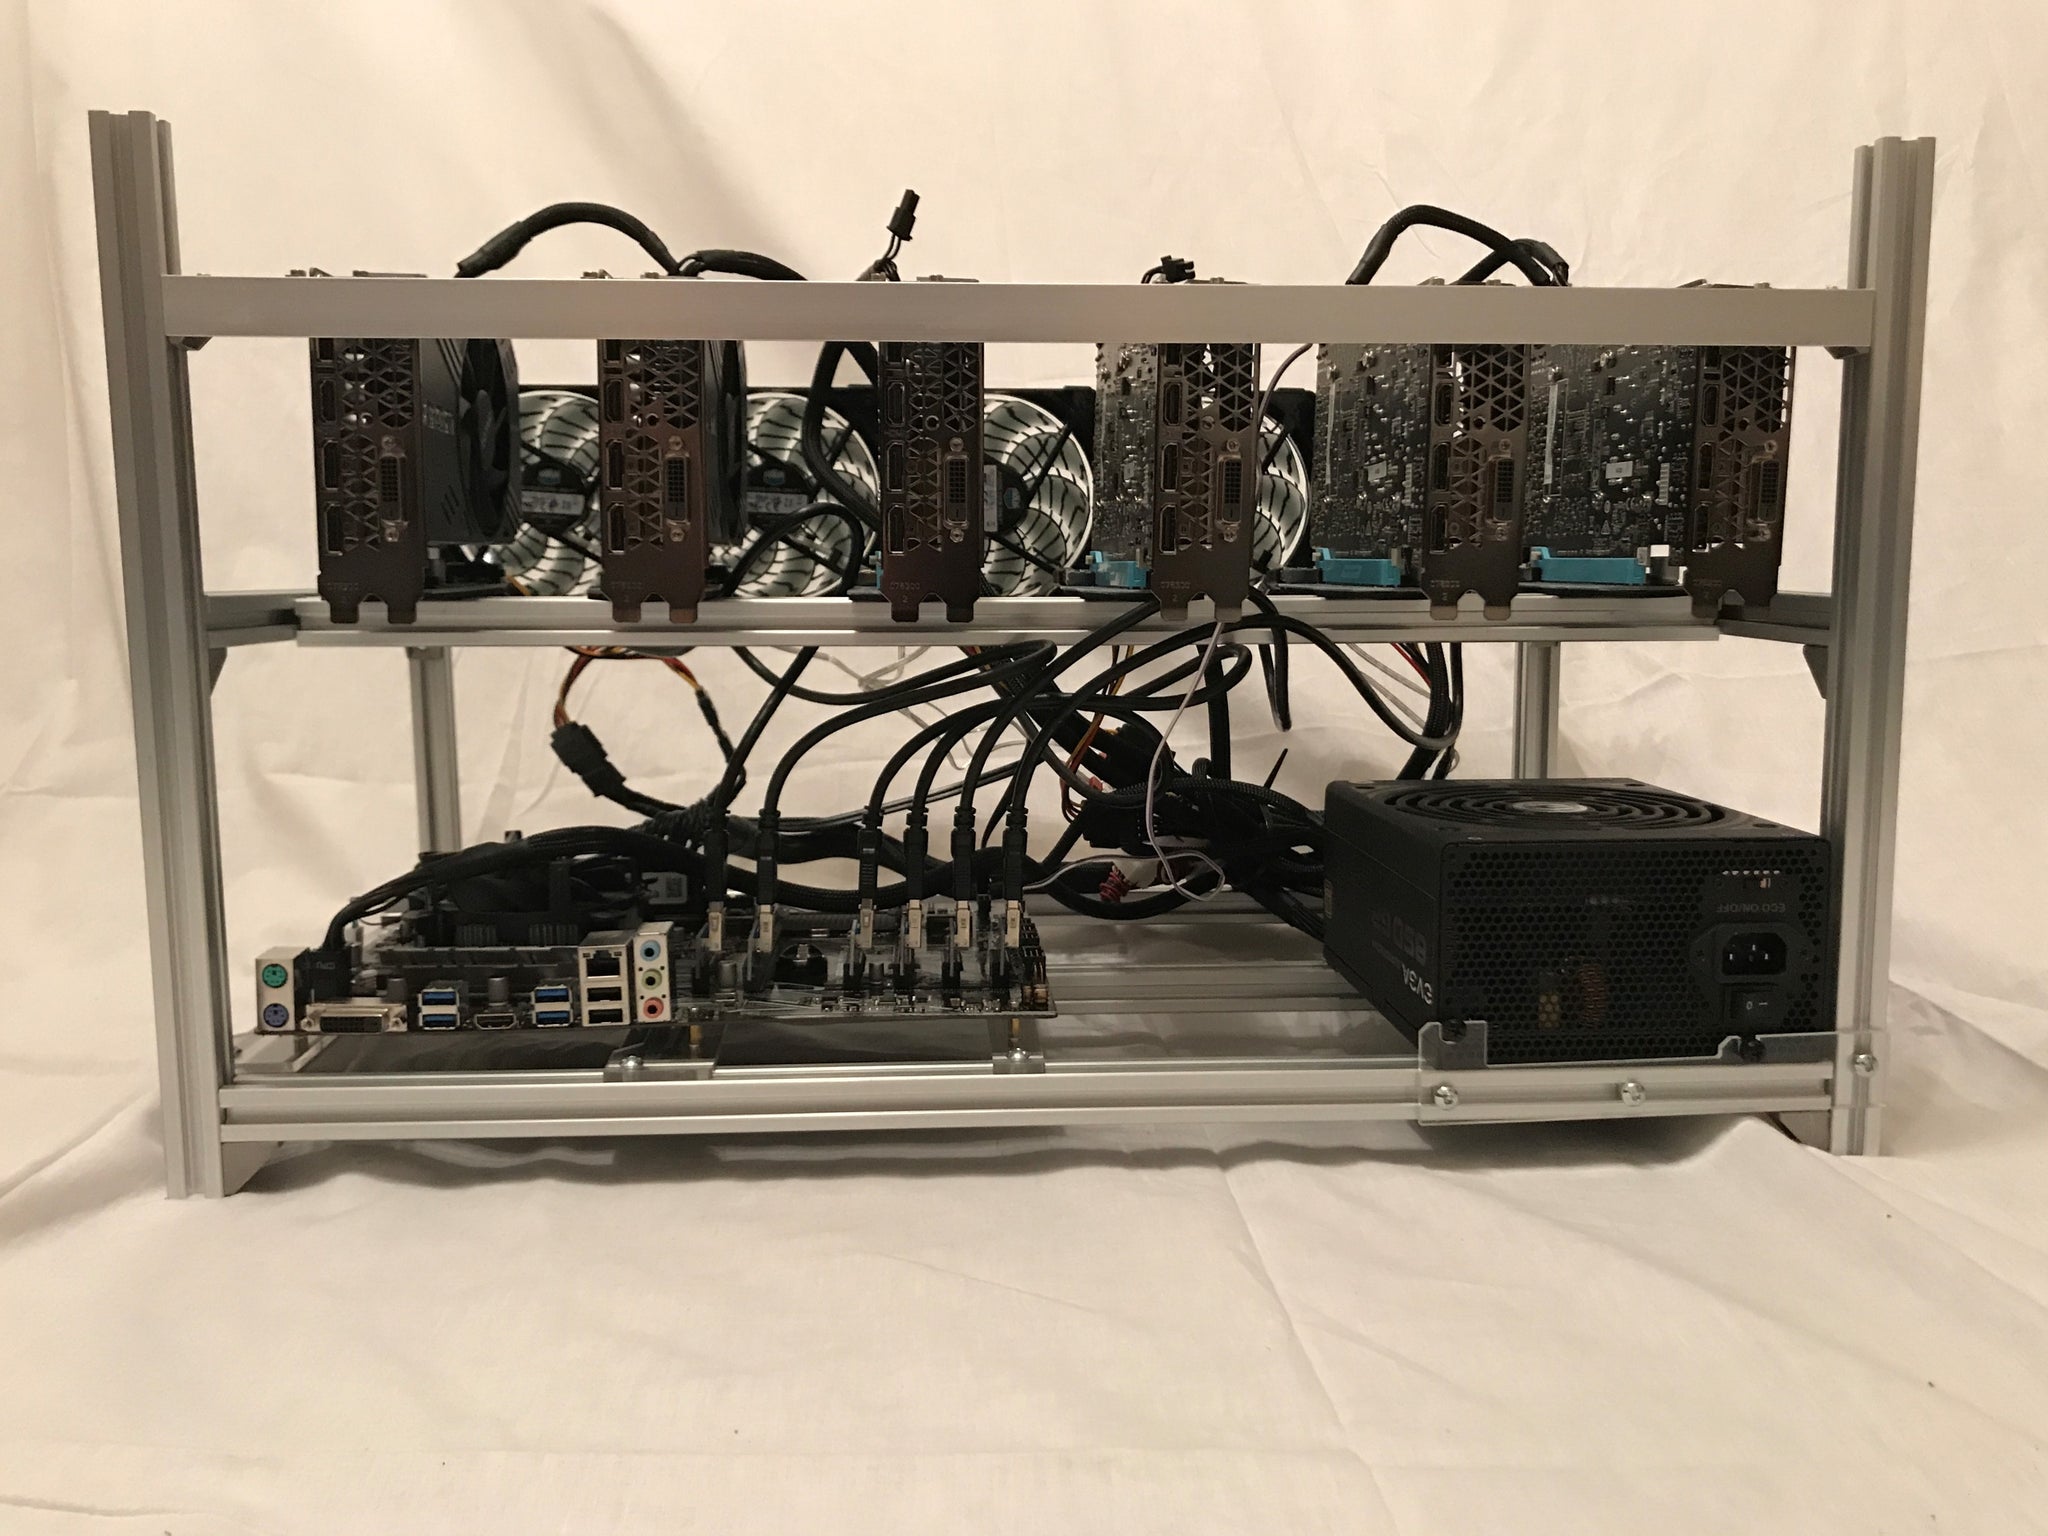 Rx 580 Mining Rig Both 6 And 8 Card Builds Are Available Please Contact For Price - 